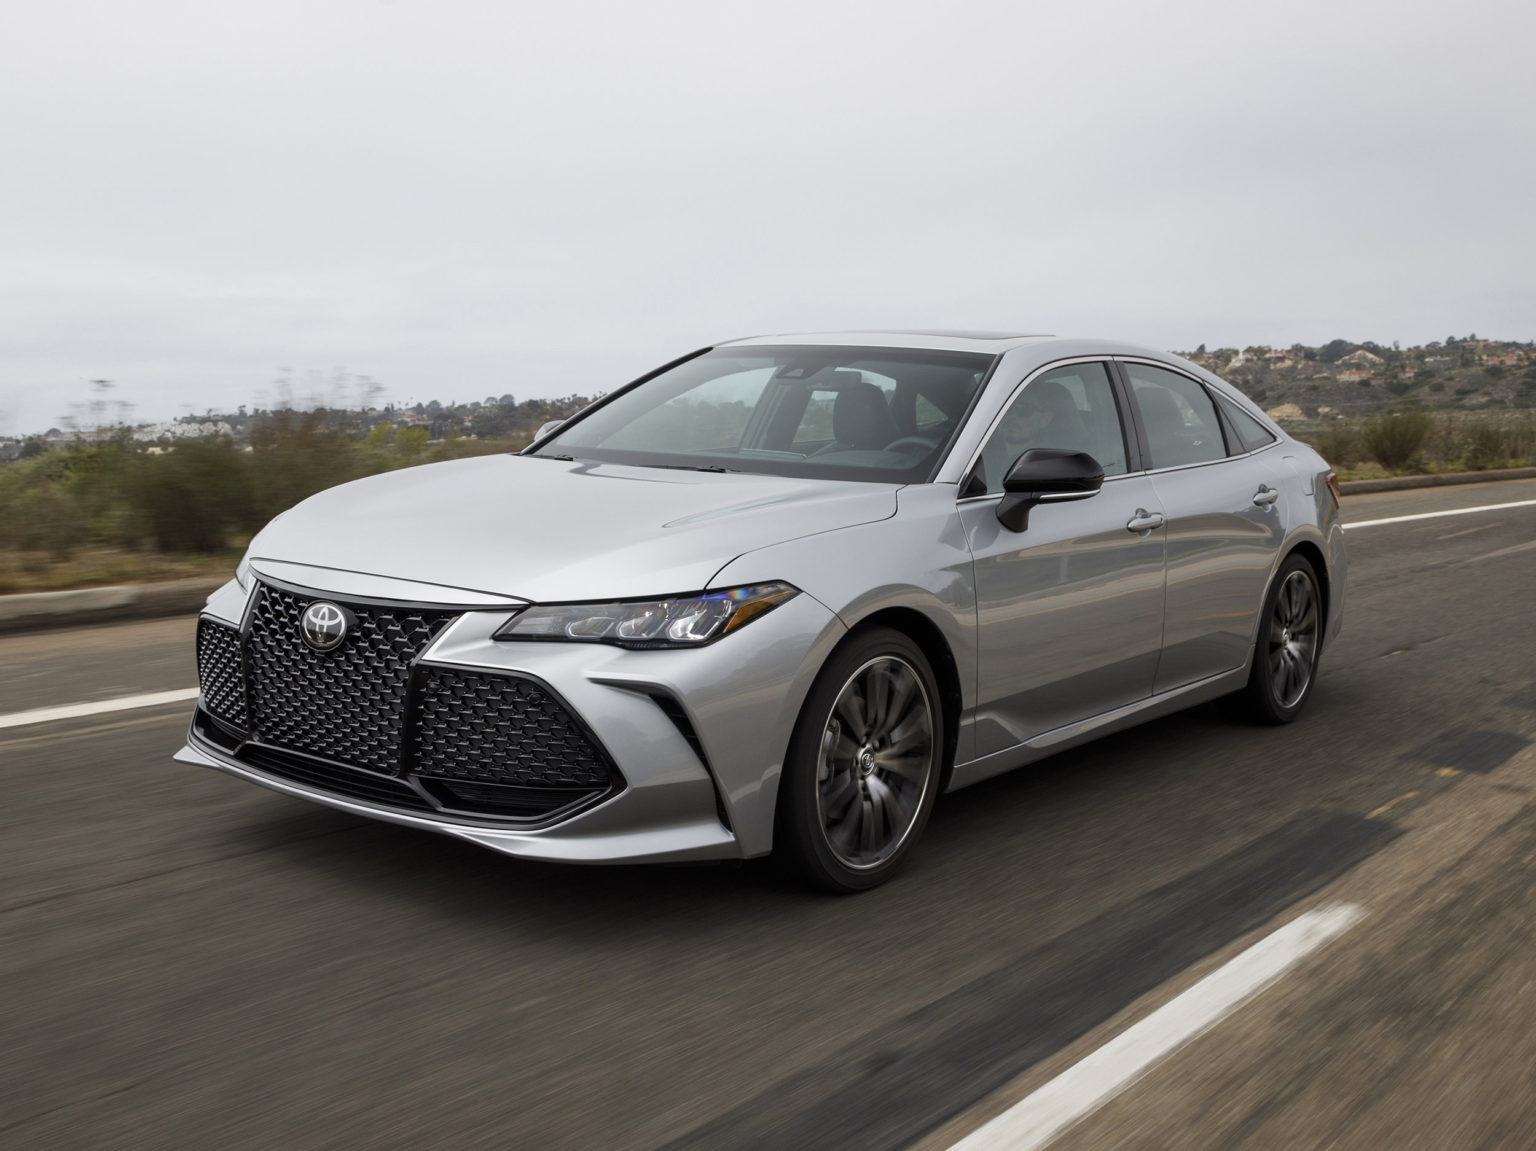 The 2020 Toyota Avalon XSE pictured here is the non-hybrid variant of the model. It features a nearly identical features list.